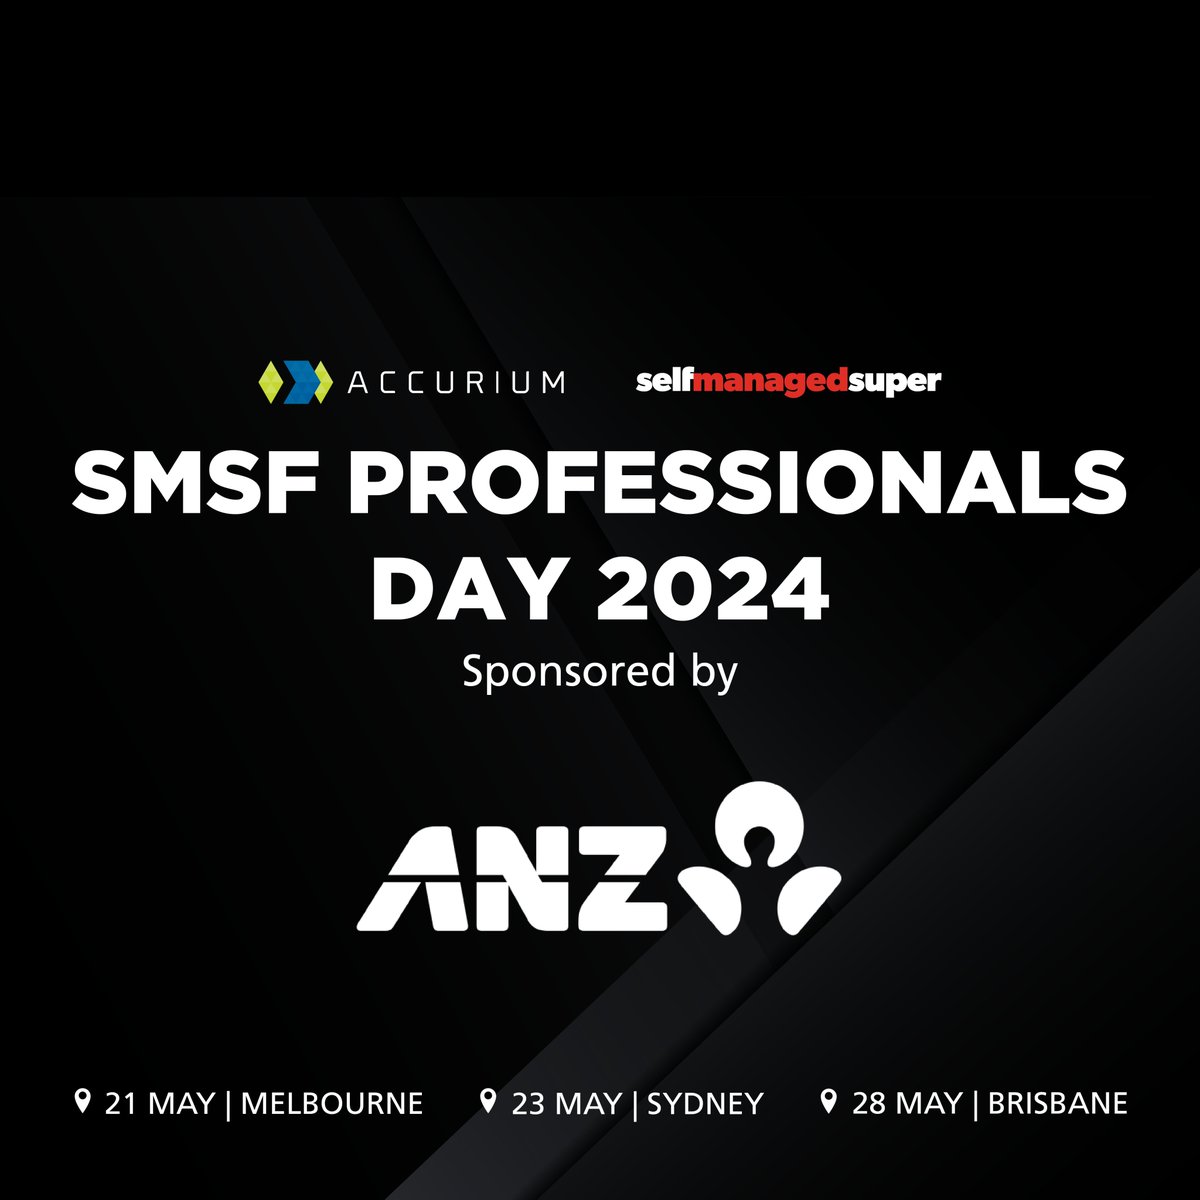 Welcome to #SMSFPD sponsor ANZ ✨ ANZ Adviser Services has been delivering cash management solutions across financial service intermediaries for over 20 years. Ready to connect with ANZ? Join us next week at #SMSFPD! Last chance to register now: ow.ly/2cvW50RHYRF